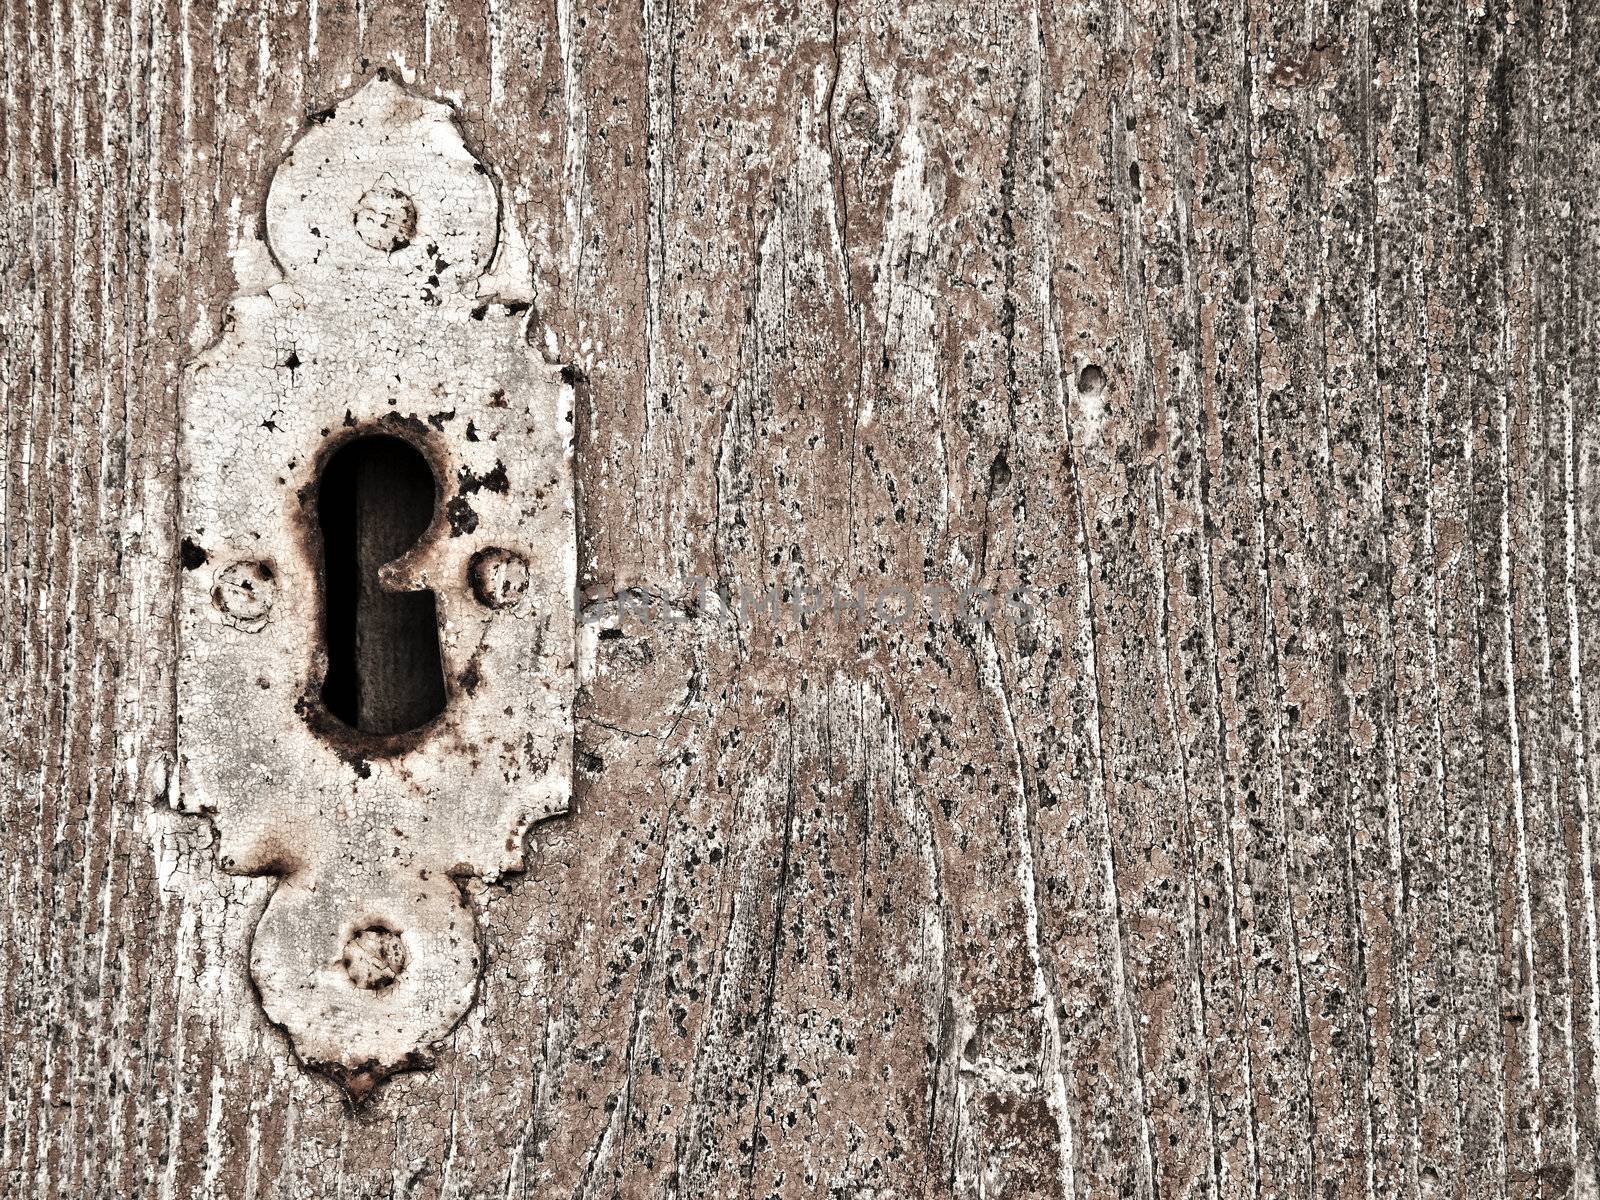 Detail image of an old wooden door and old keyhole